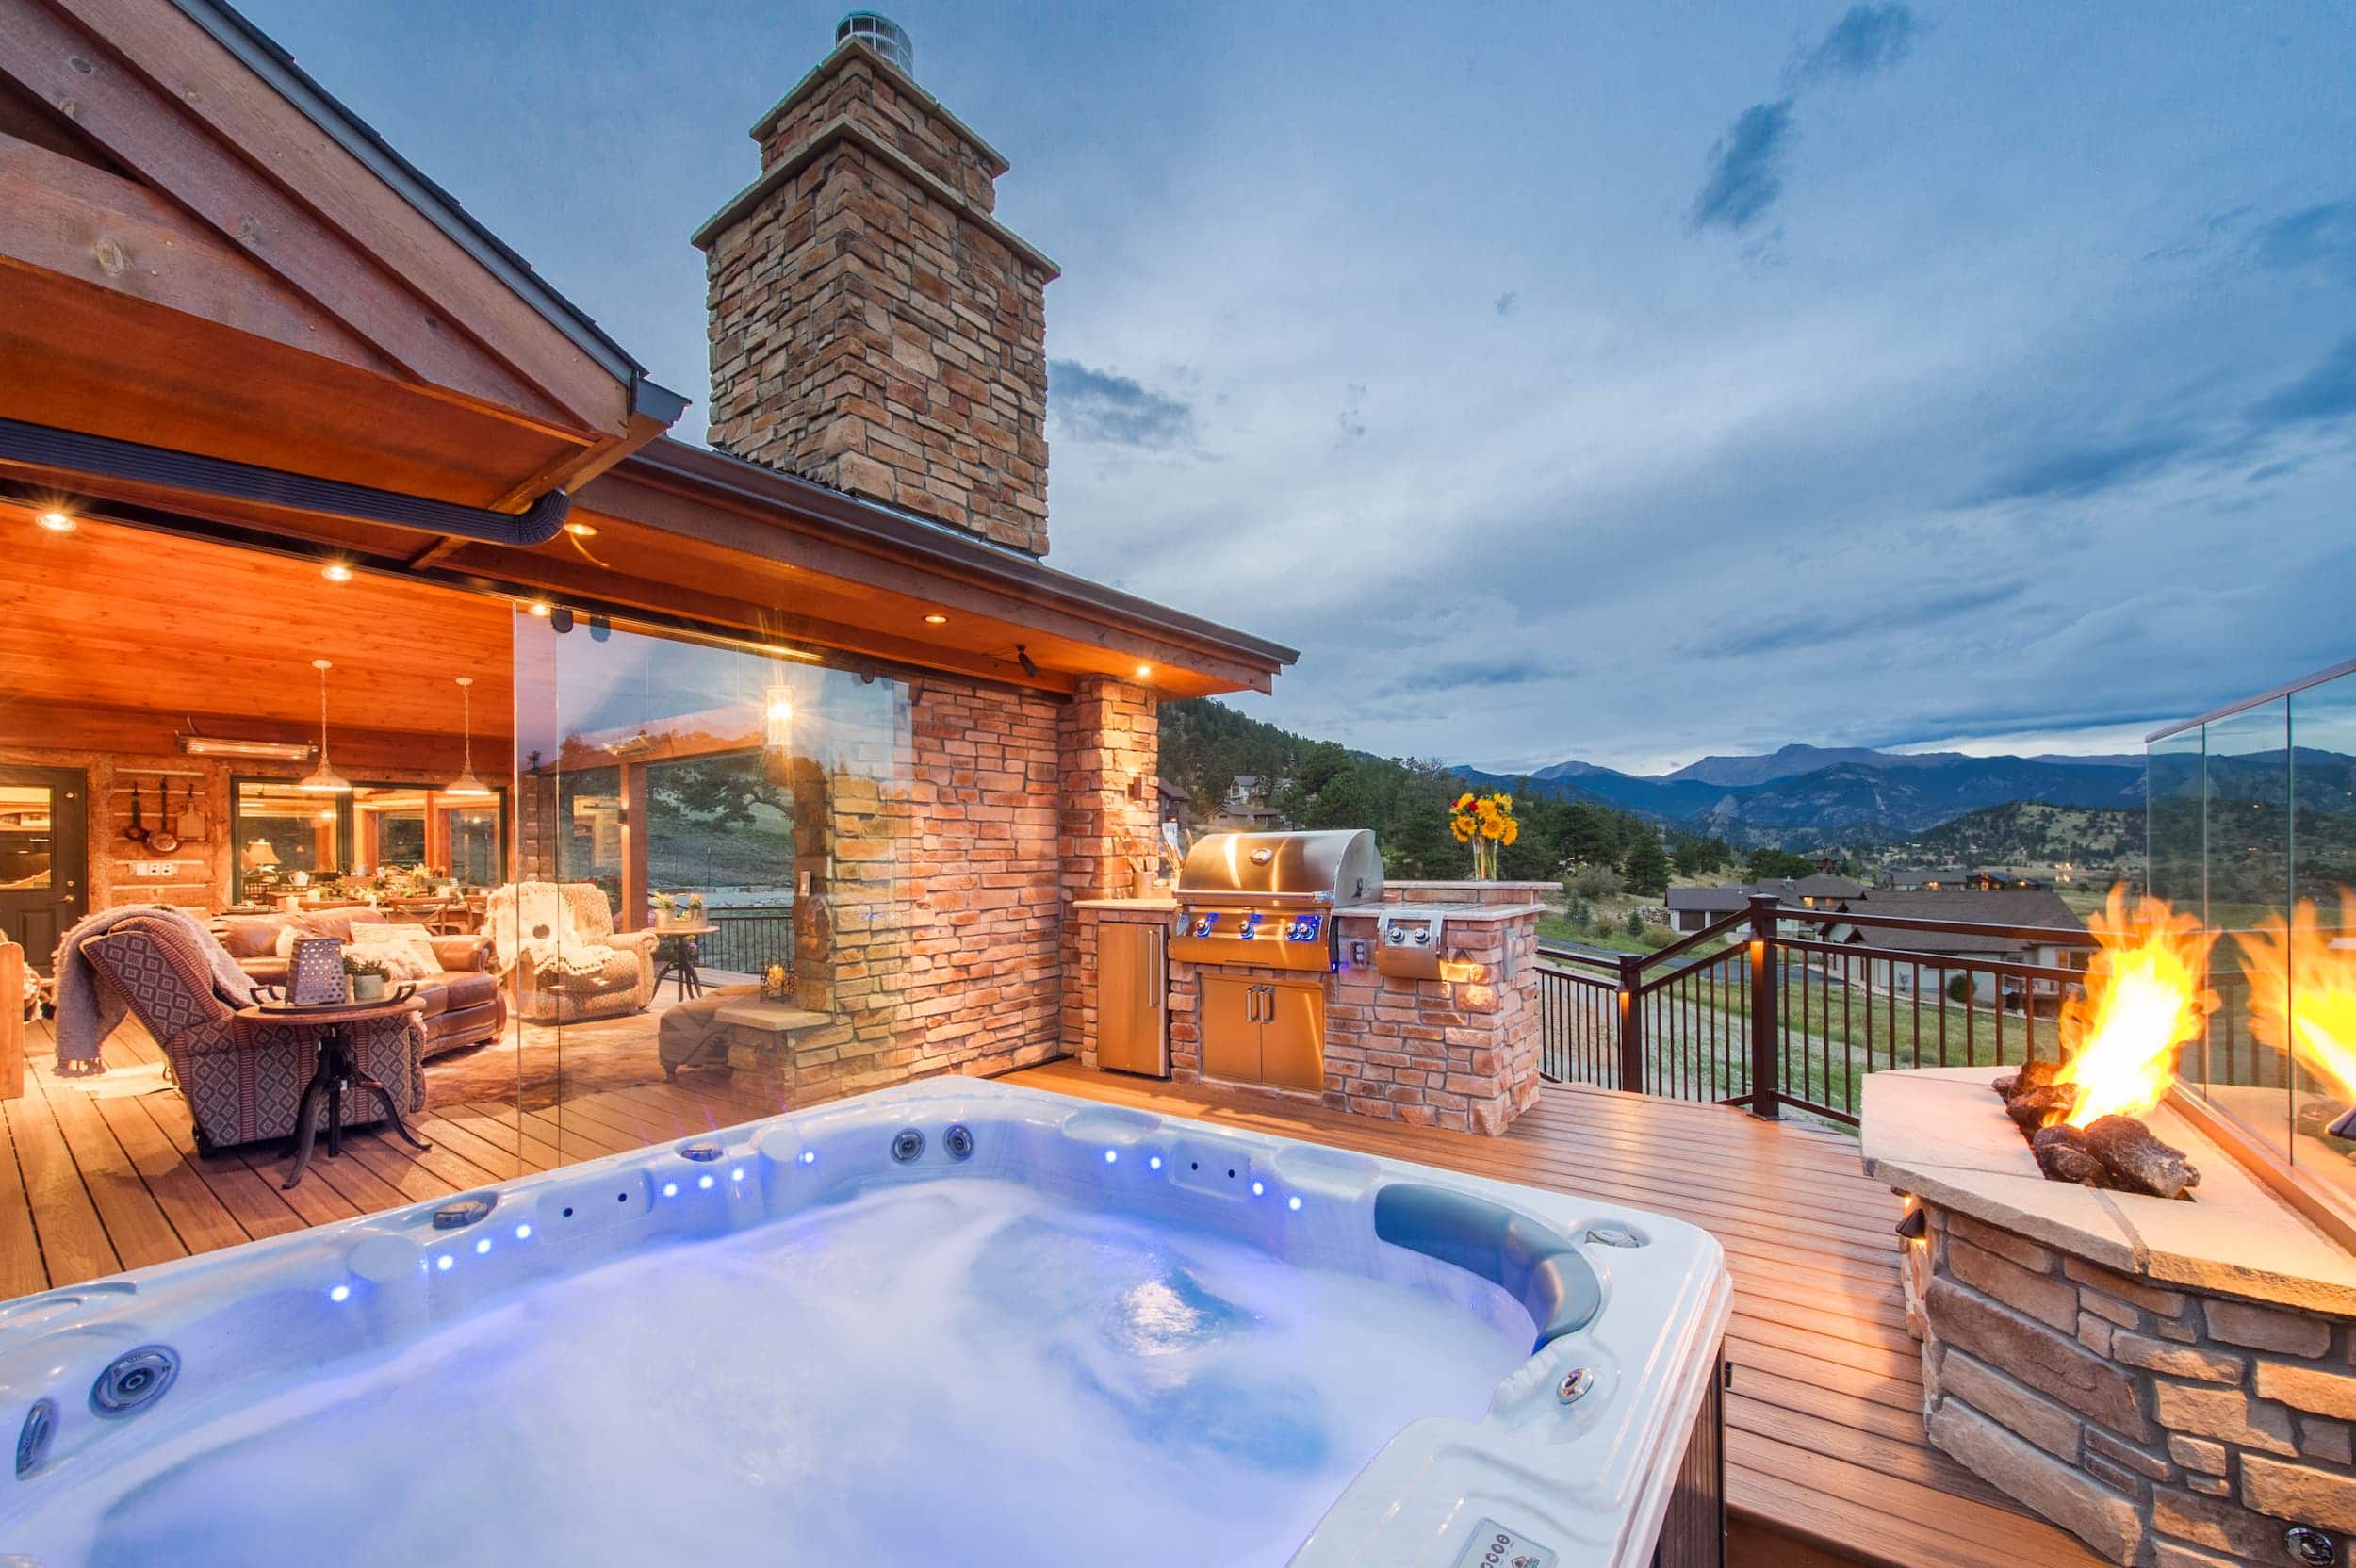 A hot tub on a deck with a grill and a fireplace.